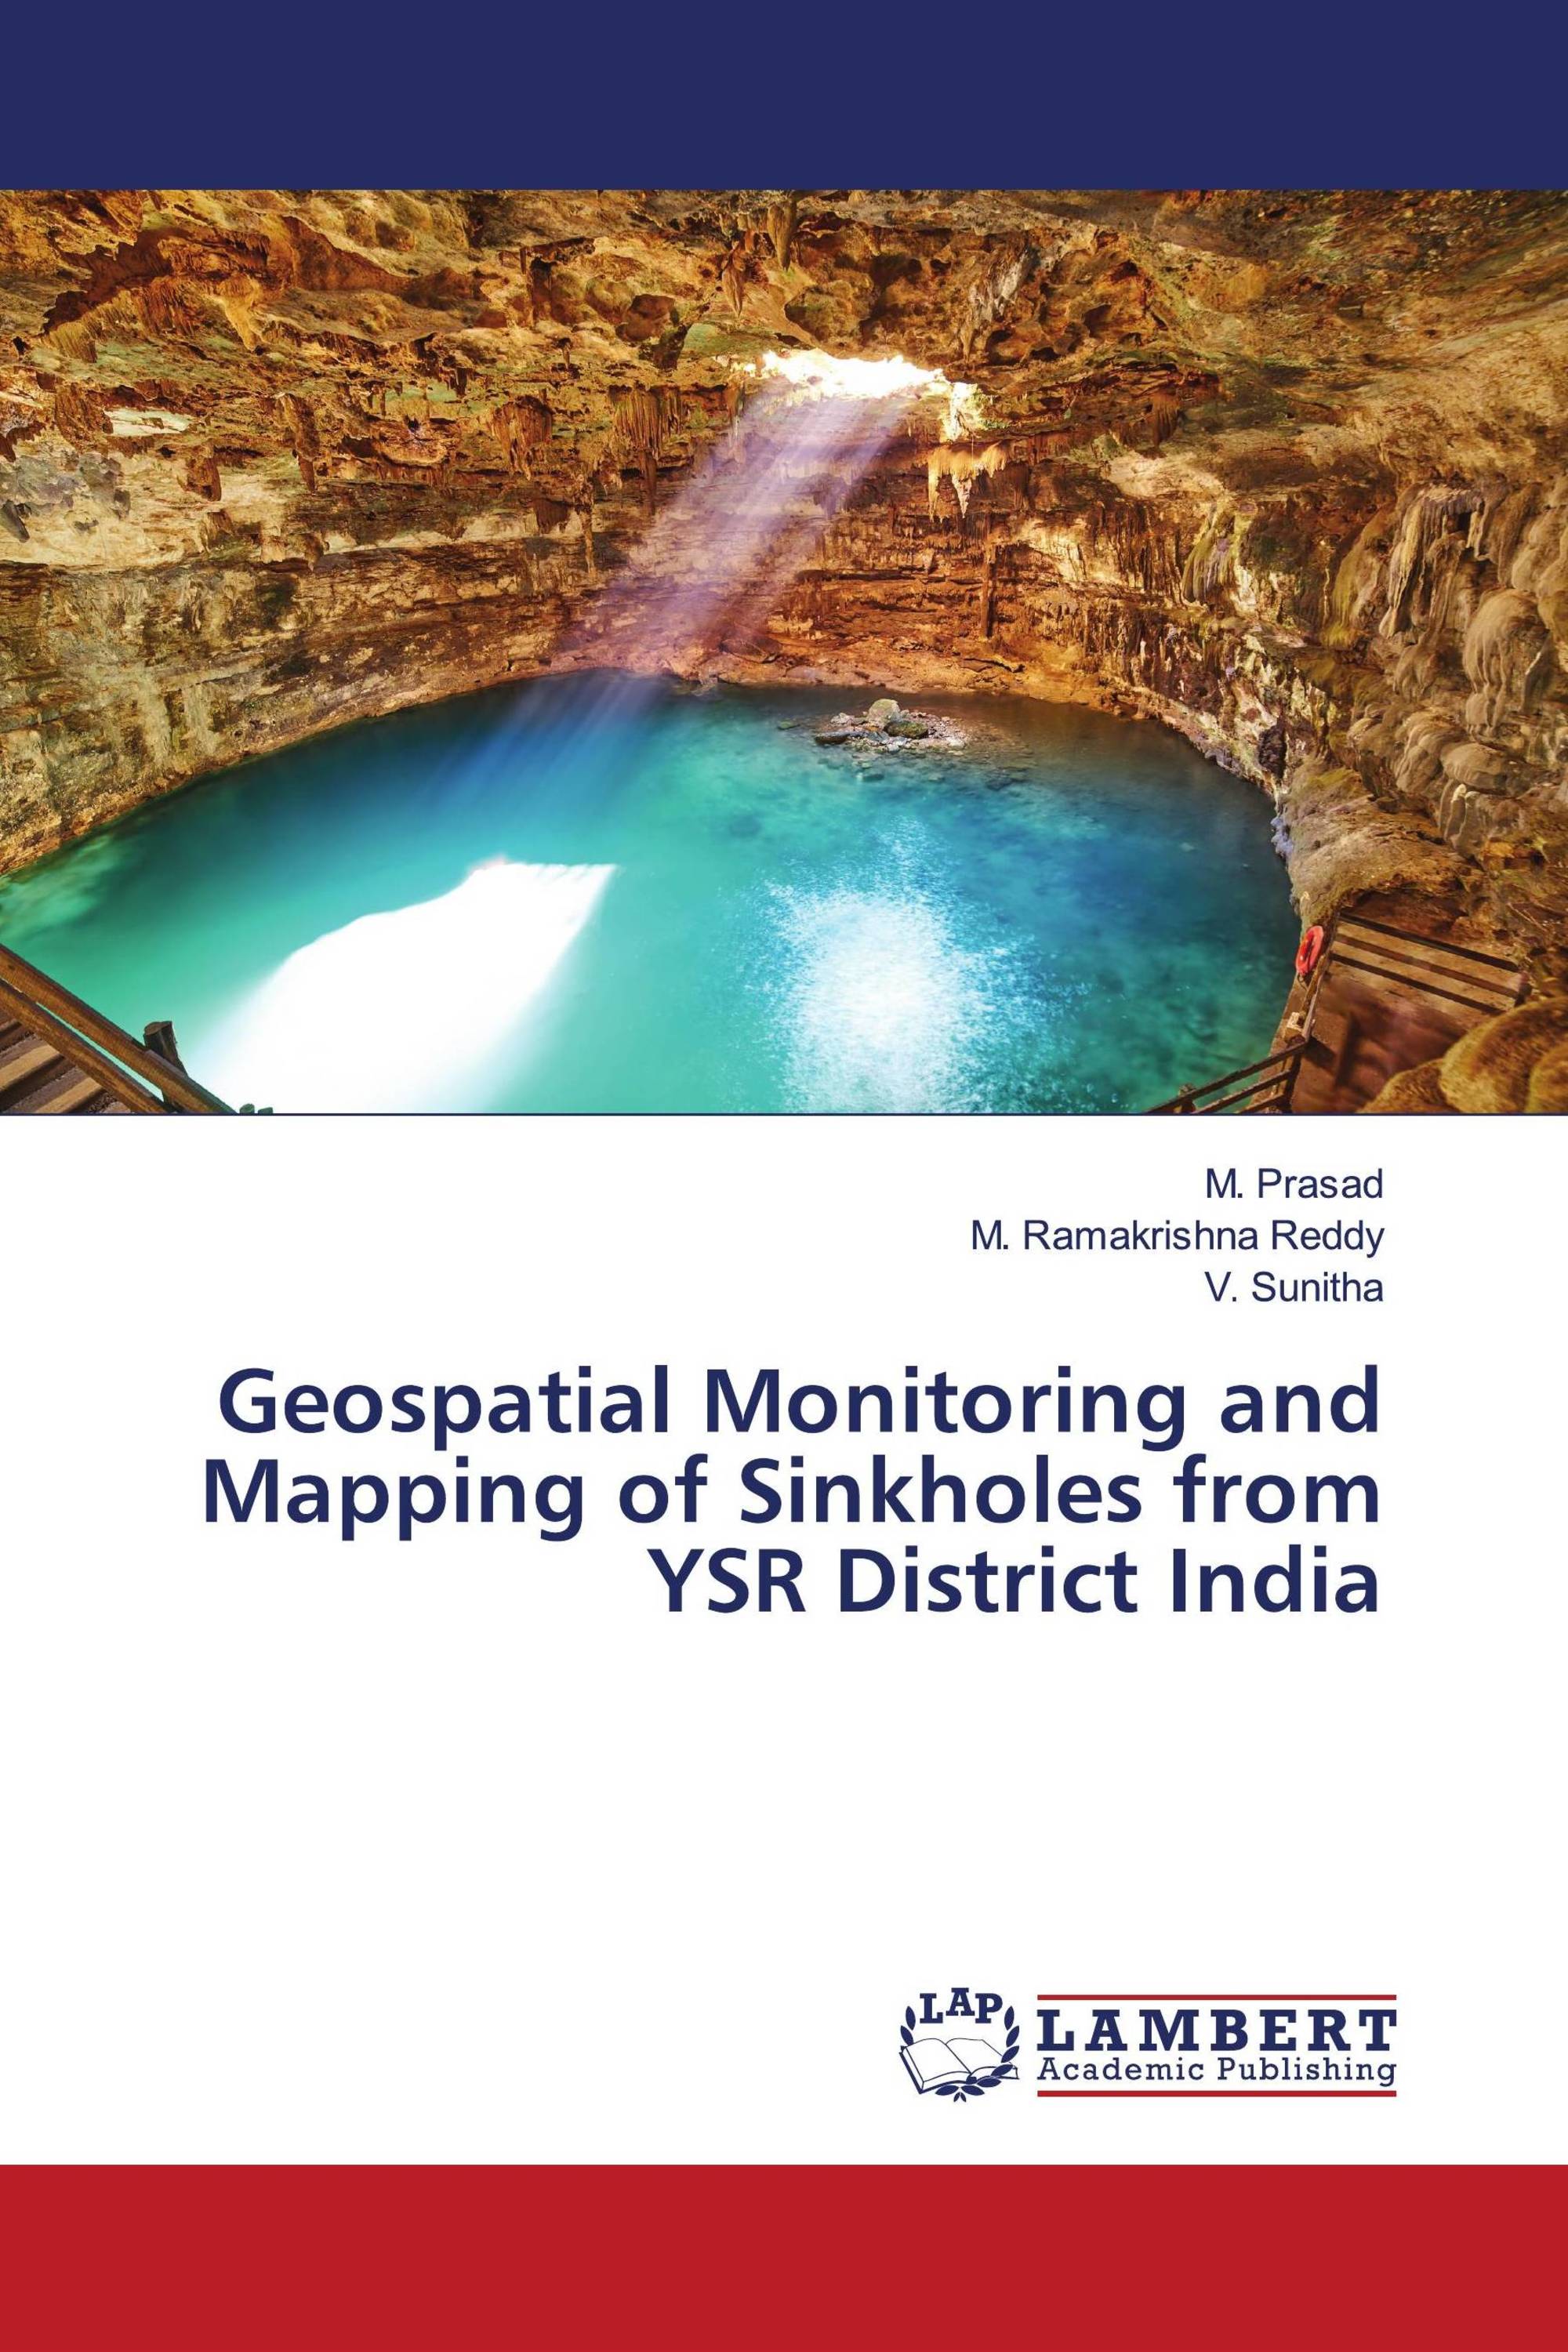 Geospatial Monitoring and Mapping of Sinkholes from YSR District India